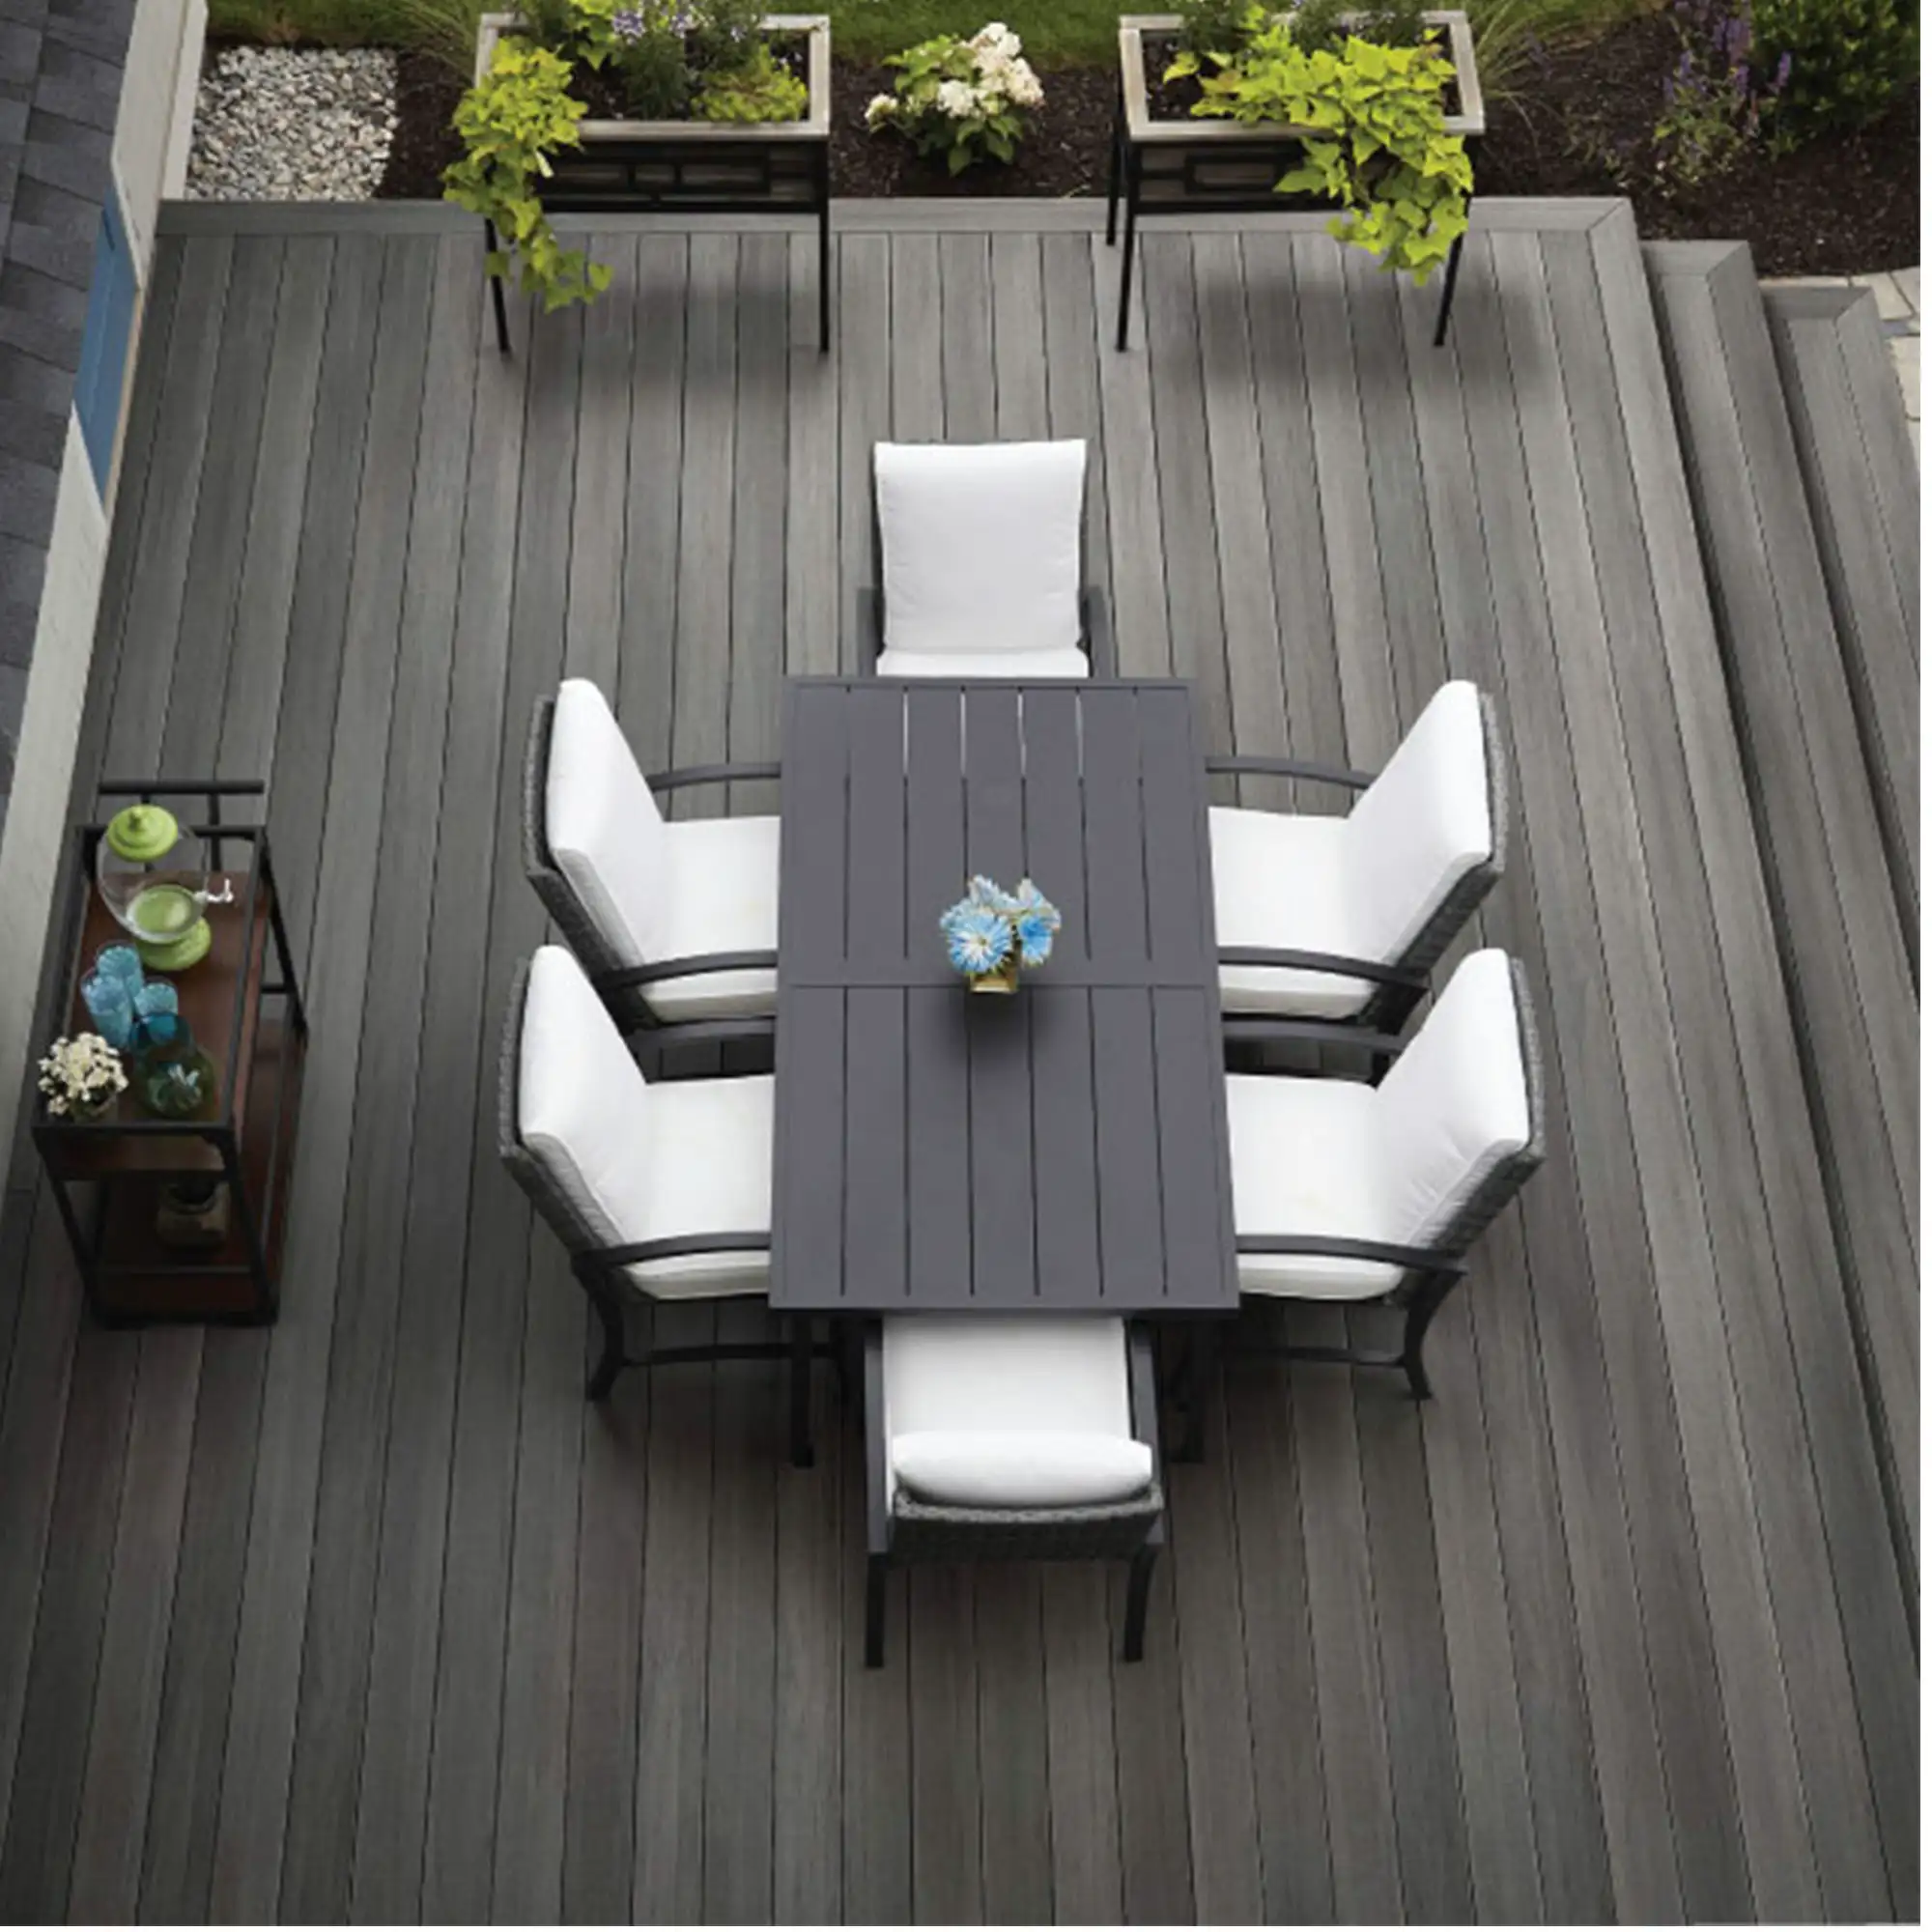 Timbertech Decking: Your Essential Guide is Here!